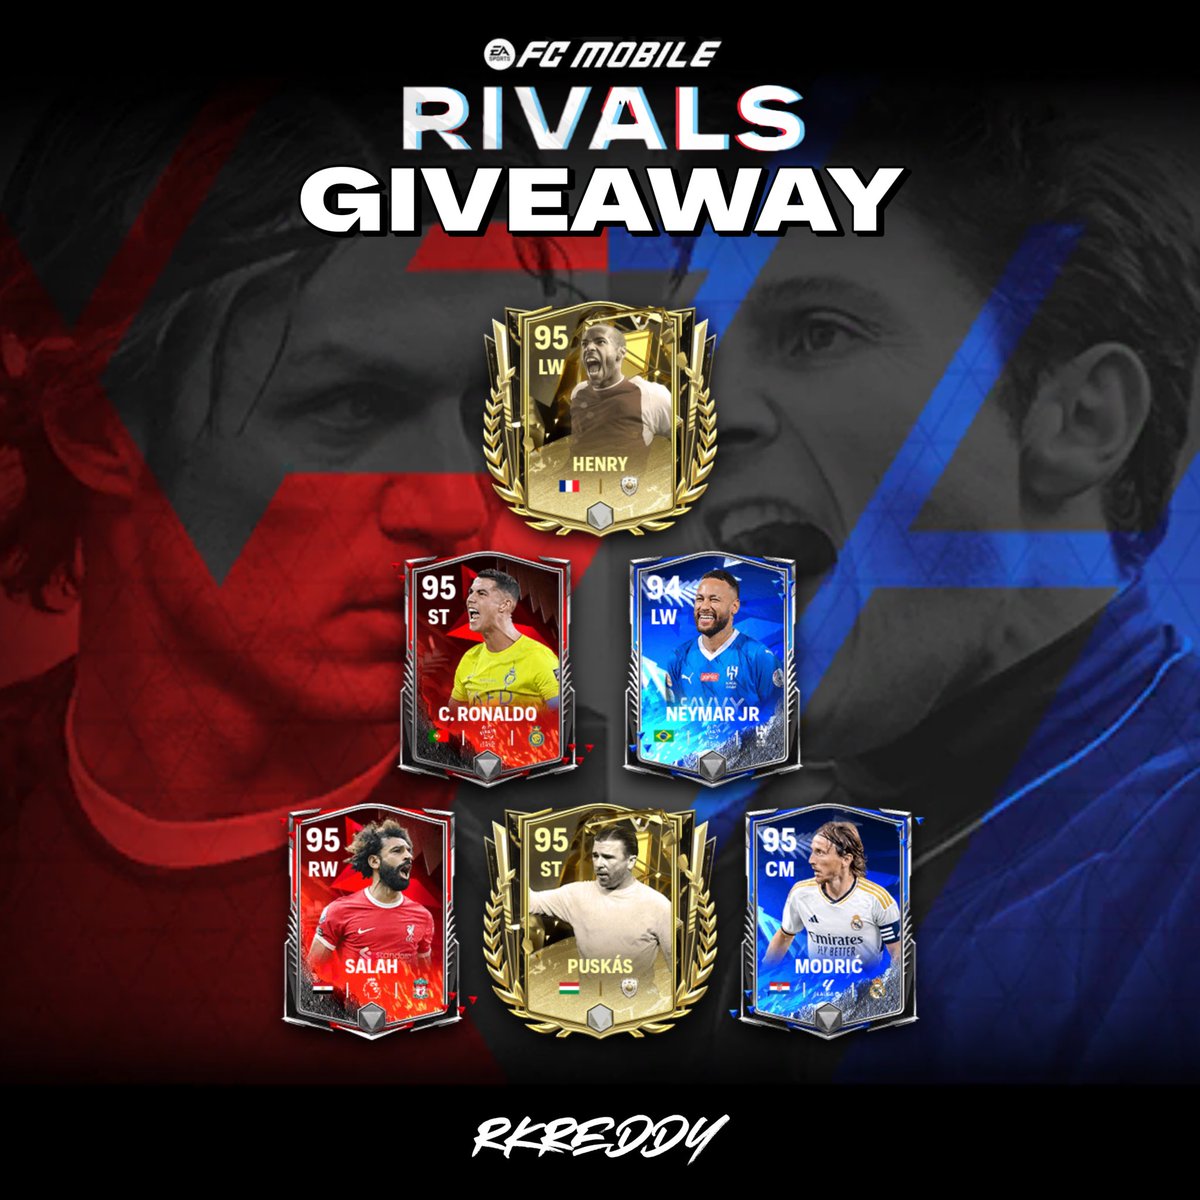 Rivals Giveaway 🚨 sponsored by @EASFCMOBILE Choice between any Rivals player or icon (tradable) To enter: 1. Retweet 2. Follow me and @EASFCMOBILE 3. Comment your favourite Rivals card. Winner chosen 7PM UTC 21/12